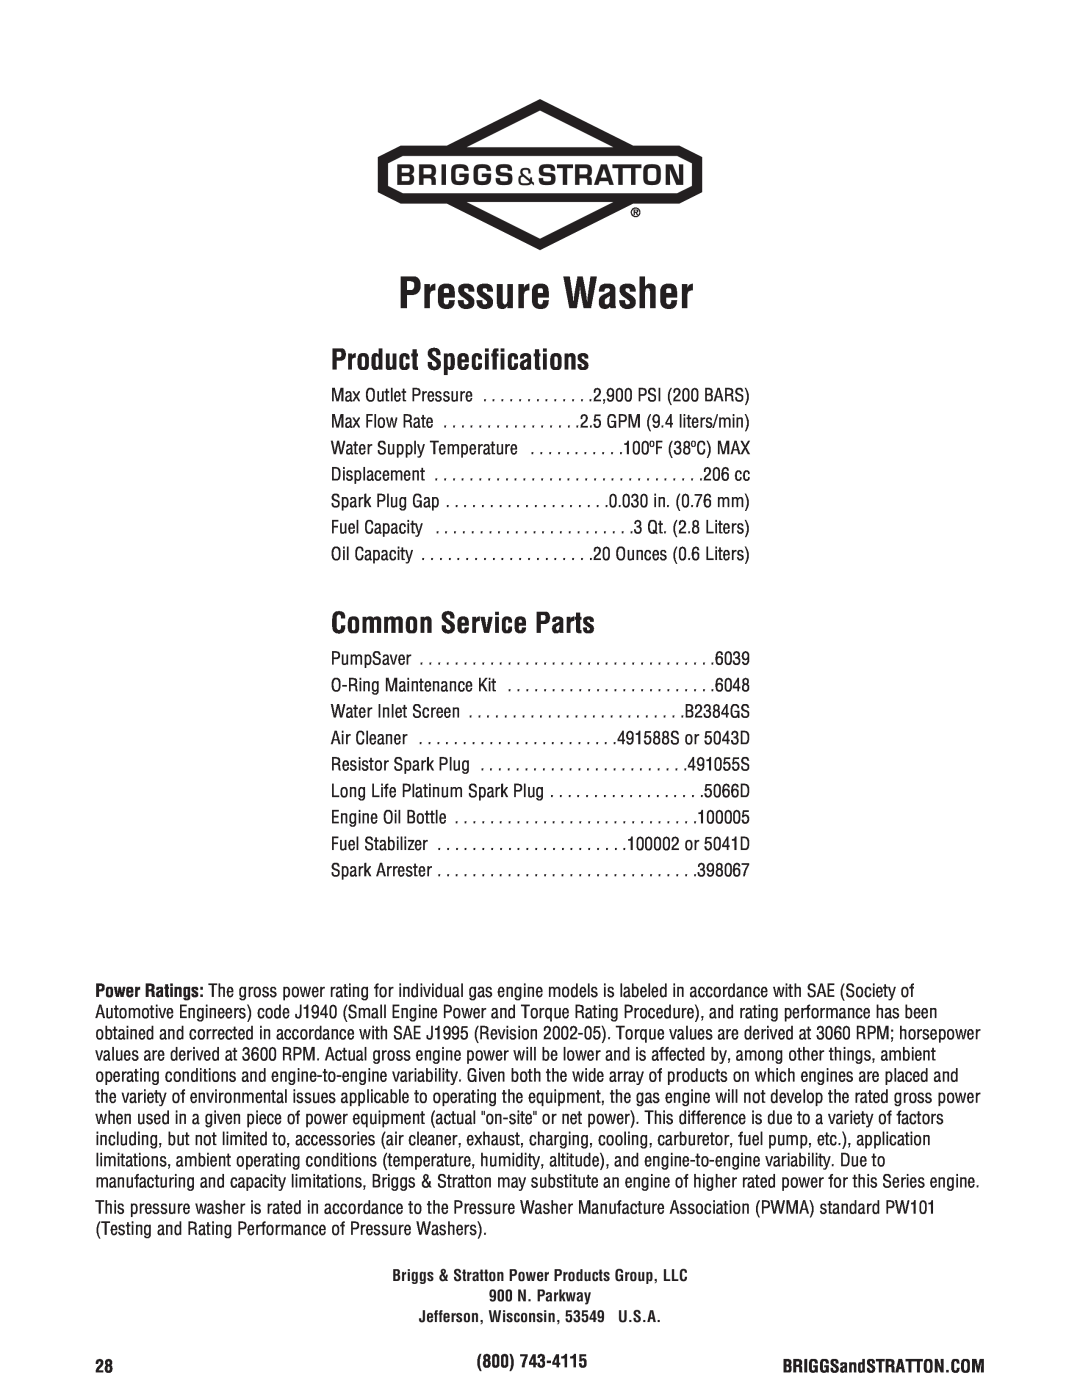 Briggs & Stratton 2900 PSI manual Product Specifications, Common Service Parts, Pressure Washer 